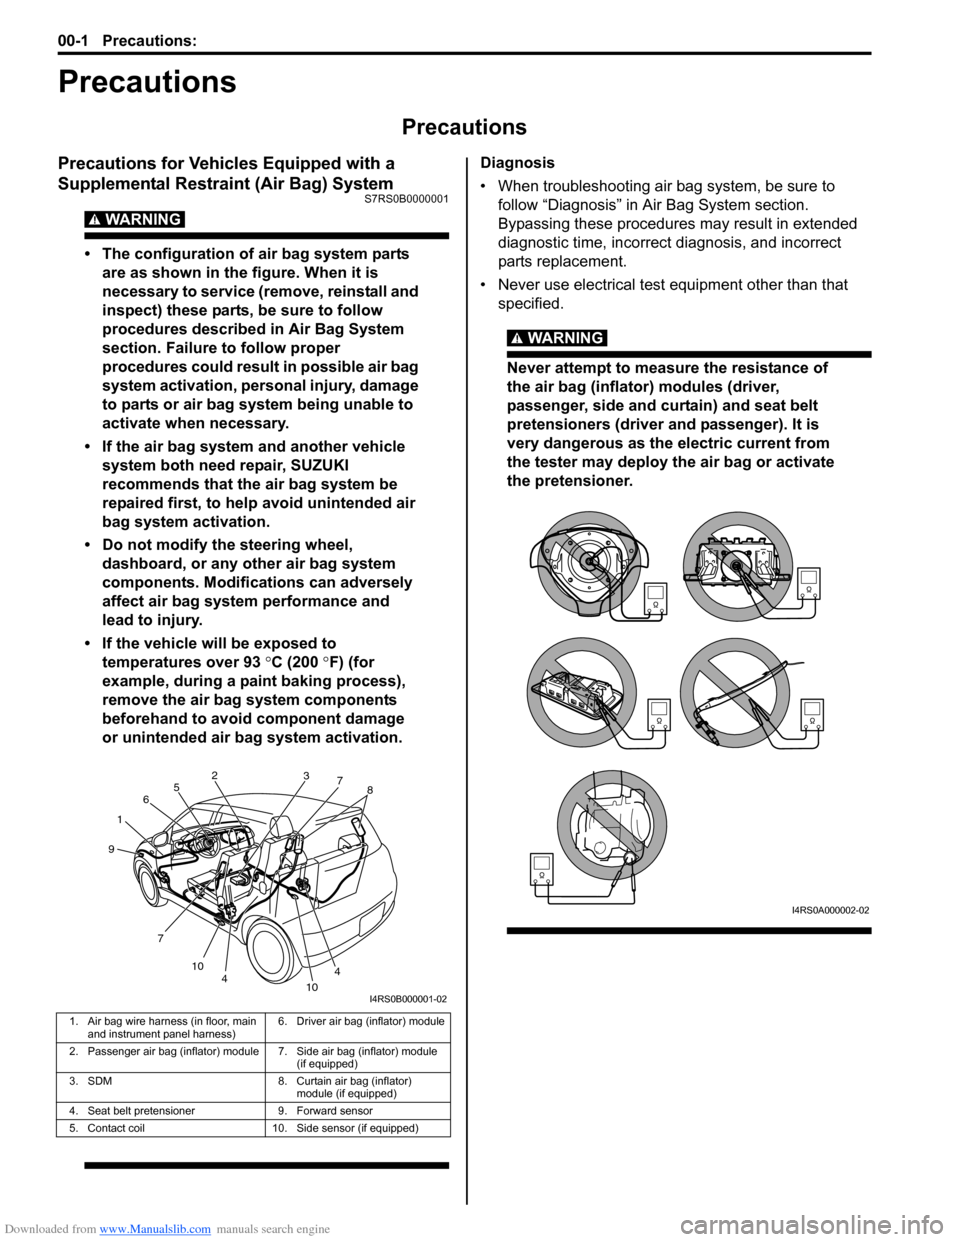 SUZUKI SWIFT 2008 2.G Service Workshop Manual Downloaded from www.Manualslib.com manuals search engine 00-1 Precautions: 
Precautions
Precautions
Precautions
Precautions for Vehicles Equipped with a 
Supplemental Restraint (Air Bag) System
S7RS0B